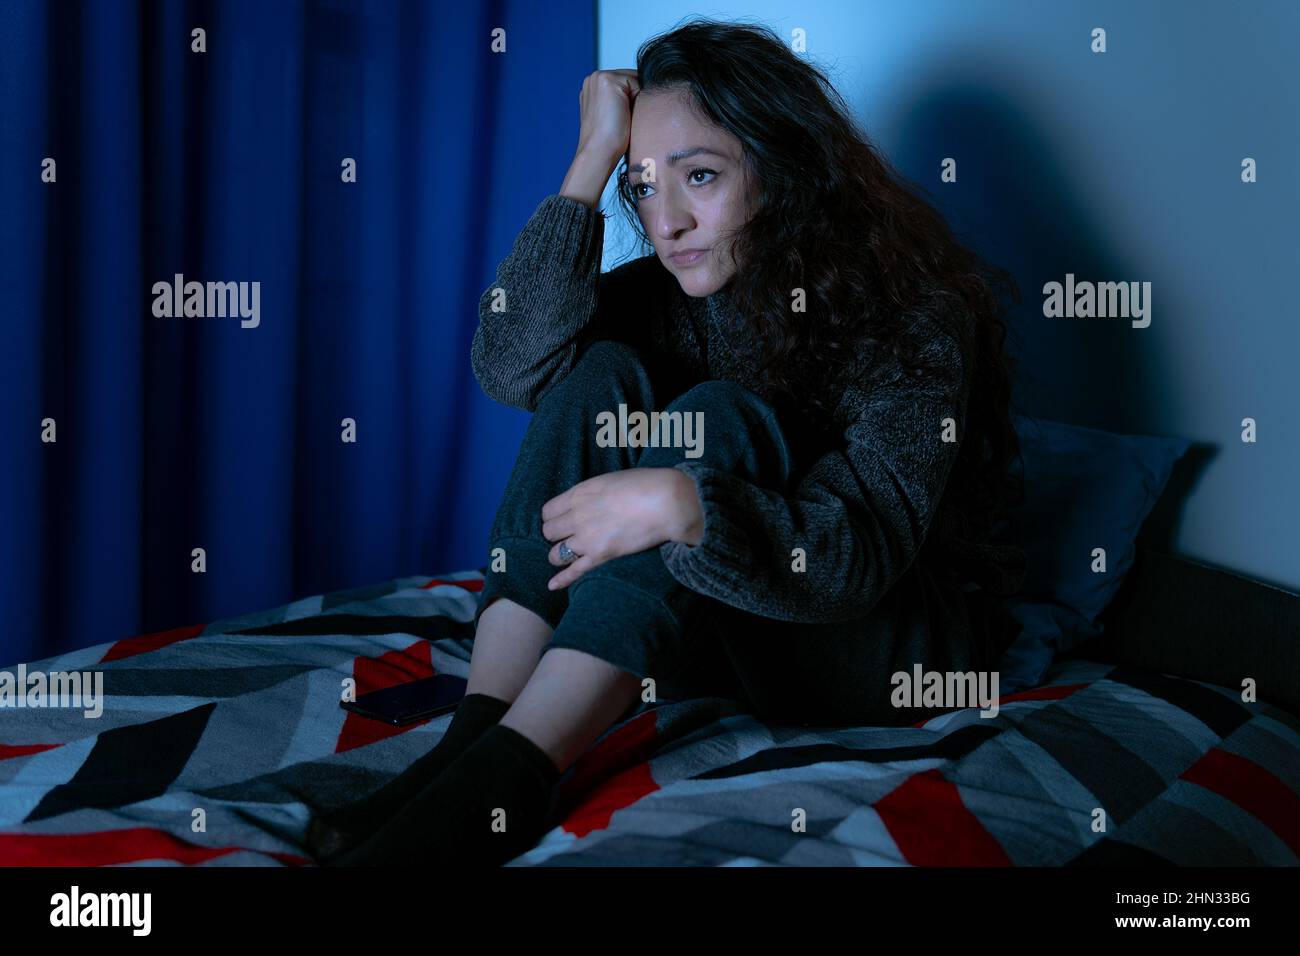 Insomnia, Depressed woman sitting up in bed at night, she can't sleep from insomnia Stock Photo